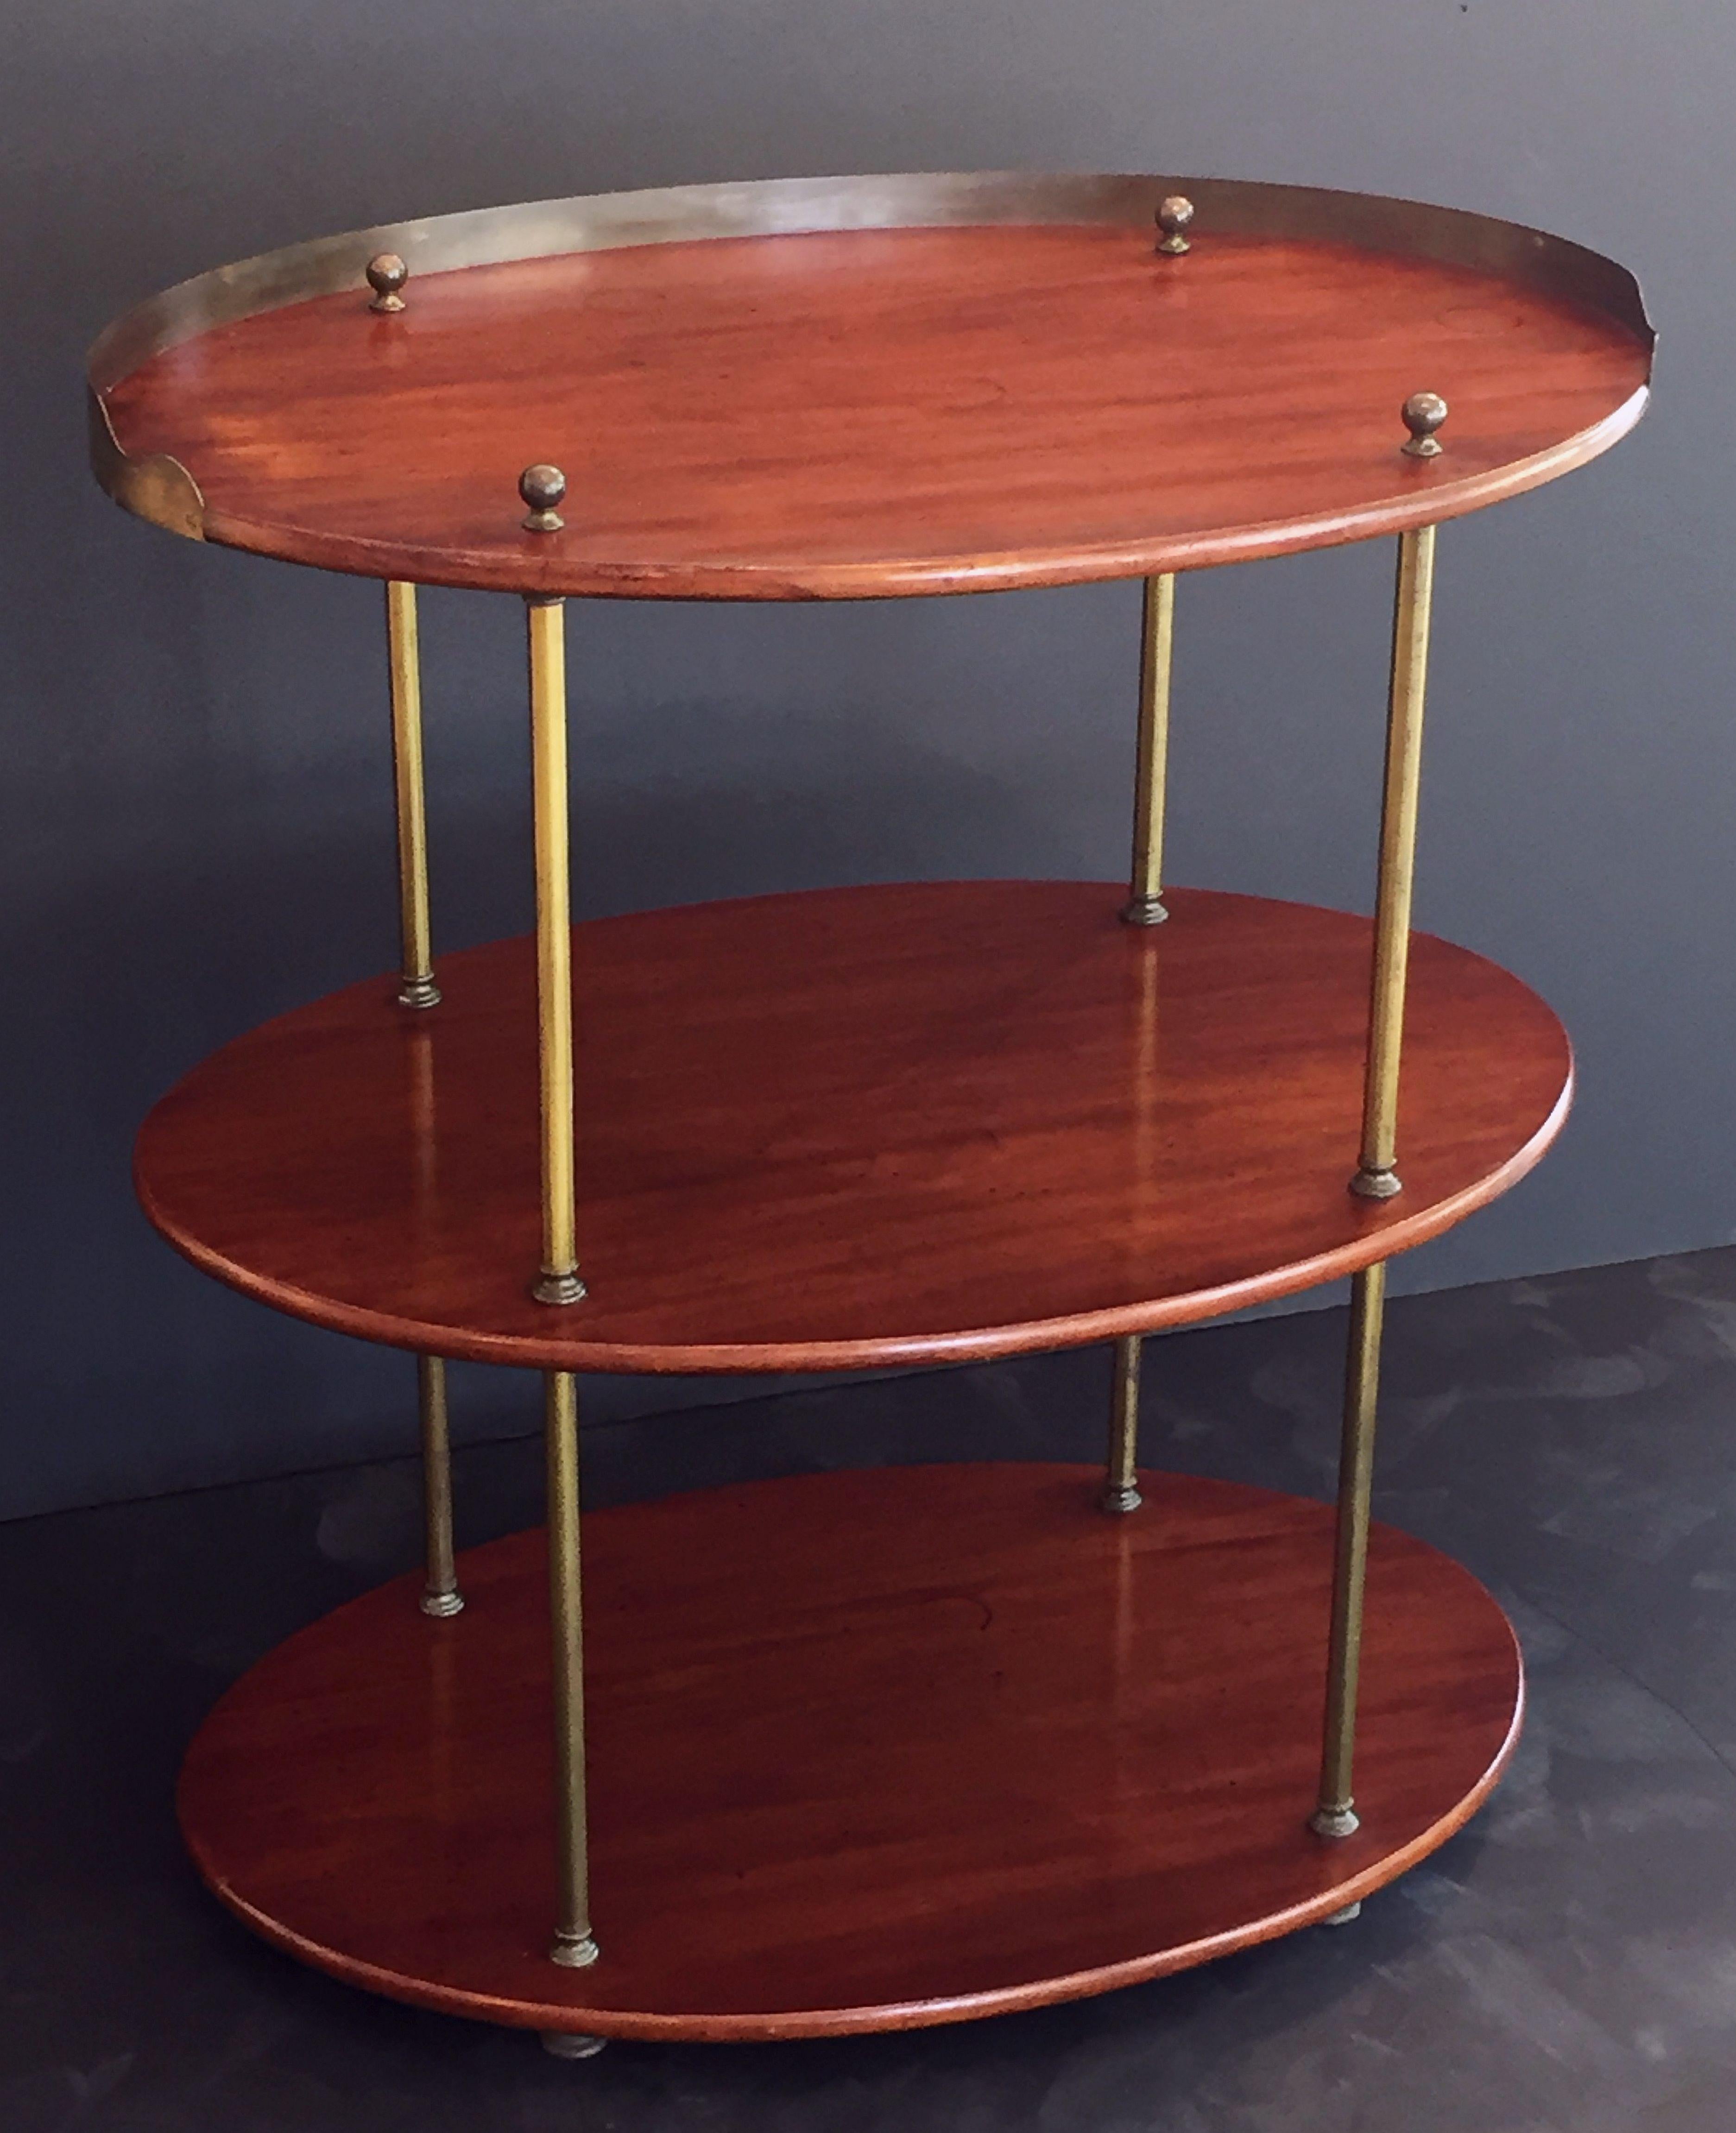 A Fine English Campaign ware or ship captain's table or three-tiered tray table of mahogany and brass, featuring an oval top with a brass gallery, over a middle and bottom tier, mounted by four stylish brass column posts, with round finial tops and